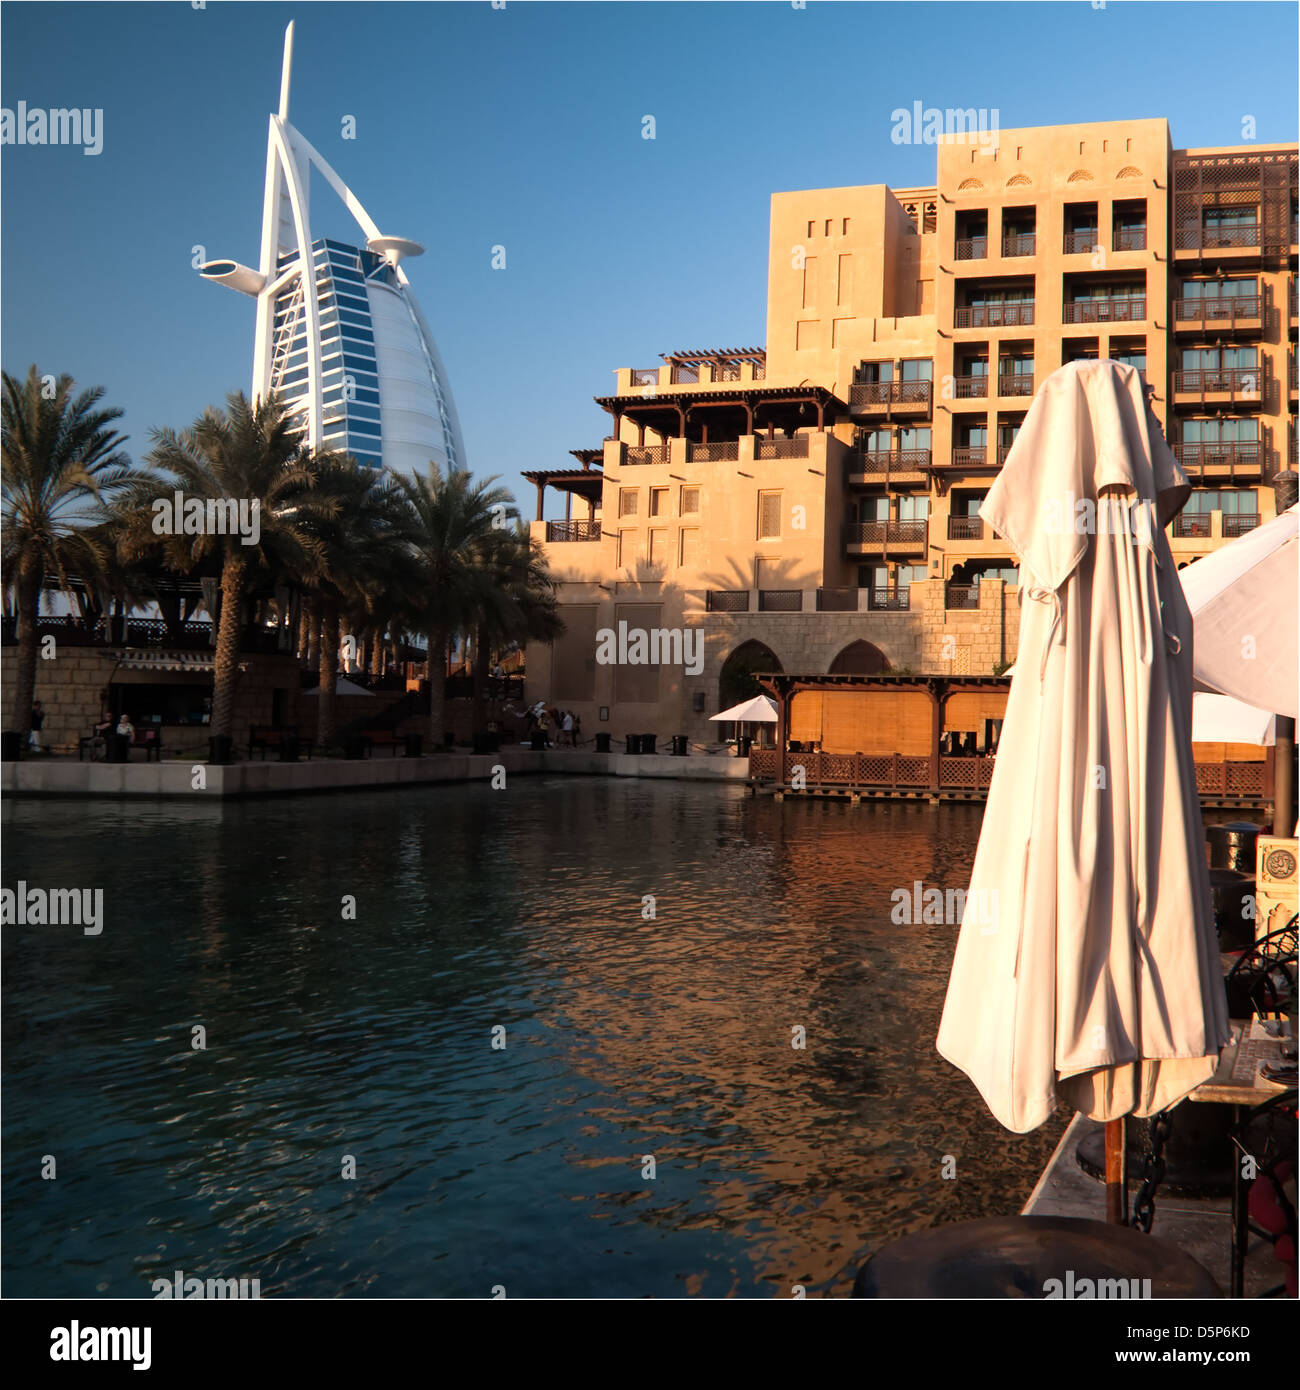 Architecture contrast in DUbai: Madinat Jumeirah Hotel classic with the modern Burj Al Hotel in the background, Square format, Stock Photo